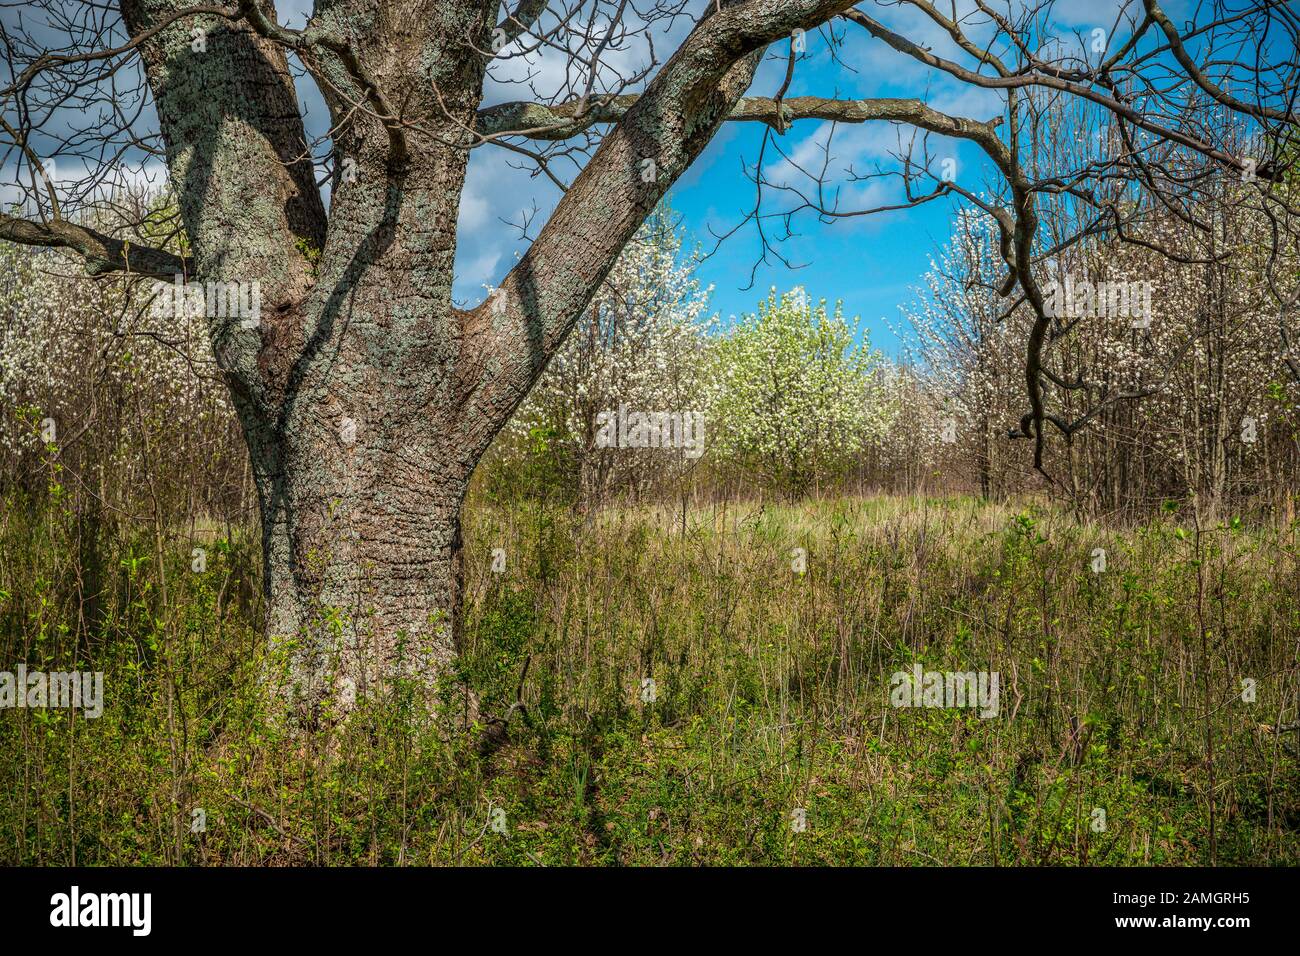 Closeup of a large tree in the field of tall grasses with flowering trees in the background on a sunny day in early springtime Stock Photo